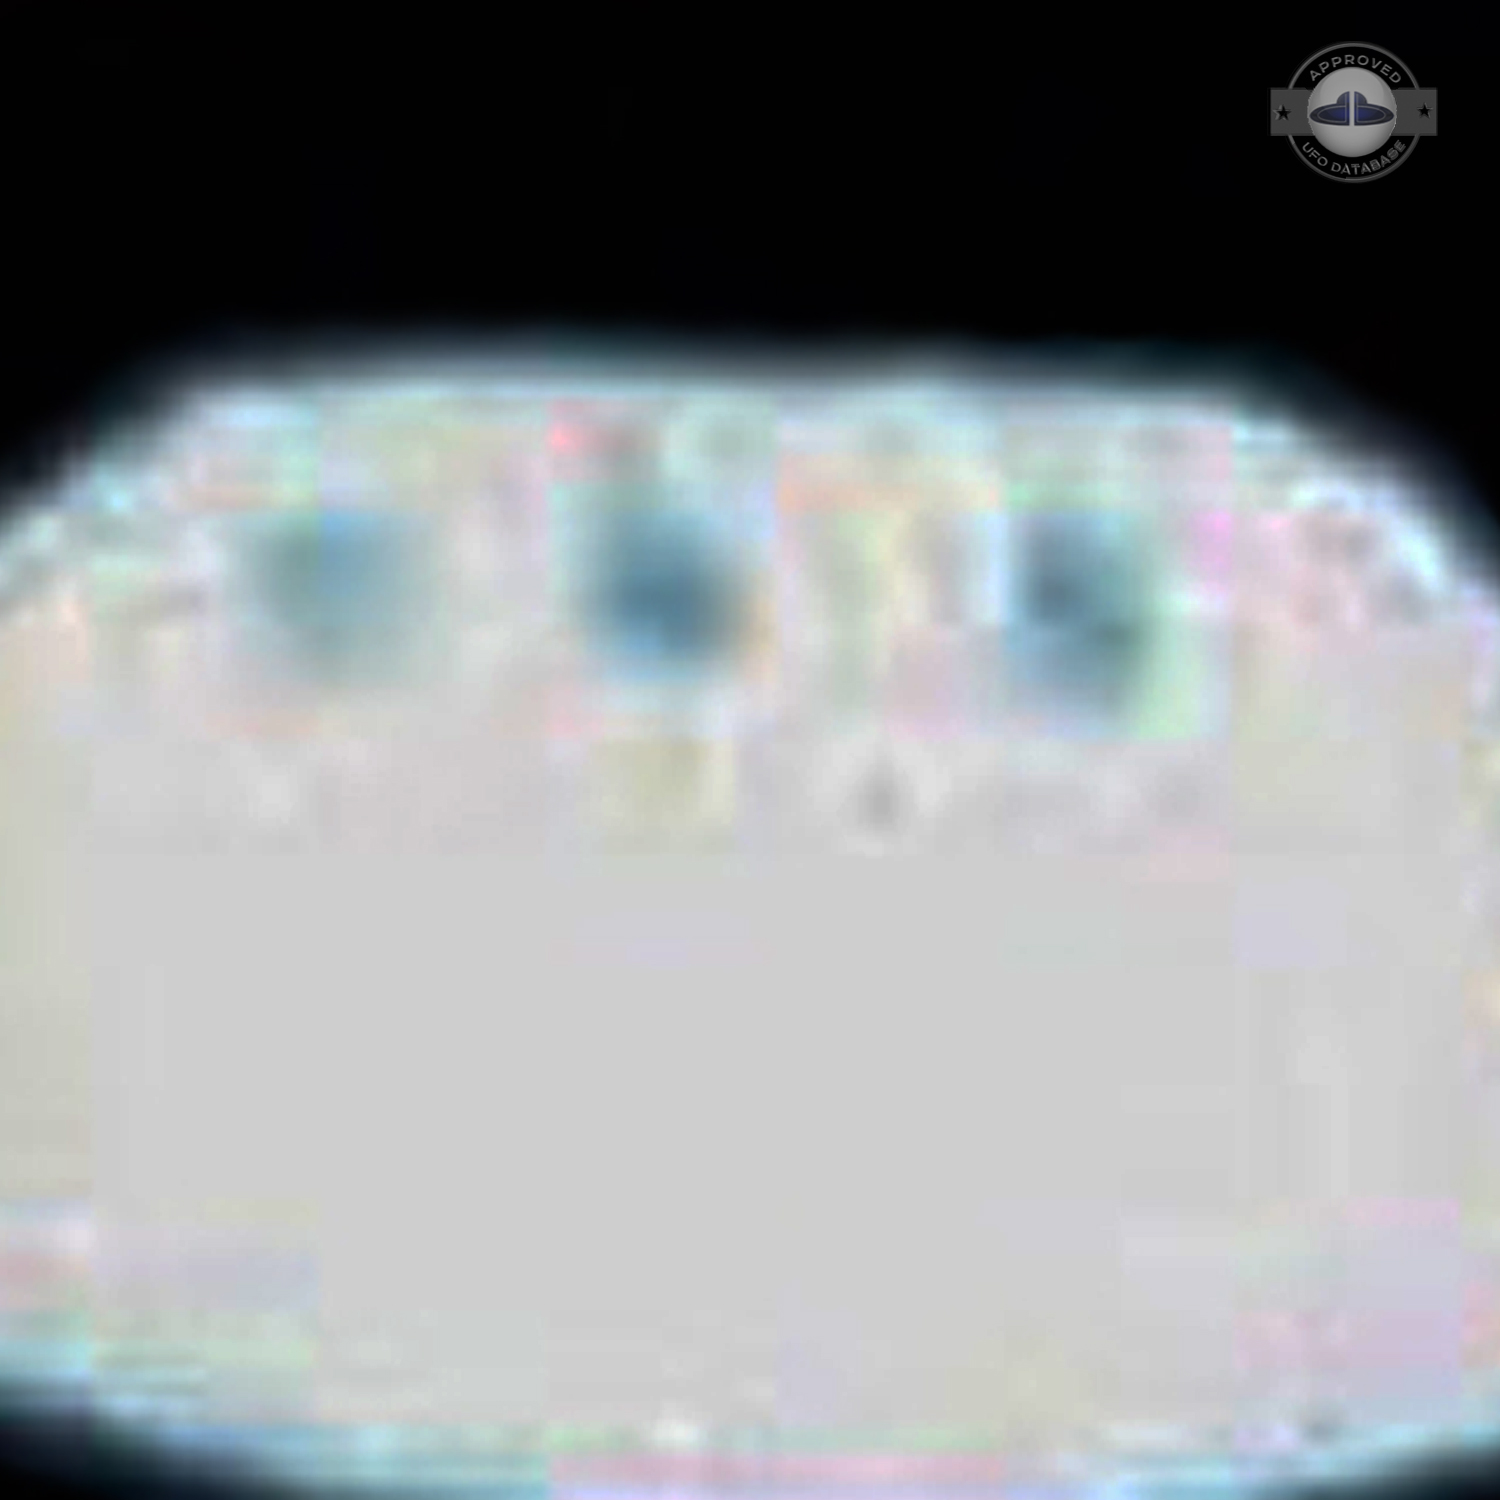 Iran 1978 UFO picture released under the Freedom of Information Act UFO Picture #231-5